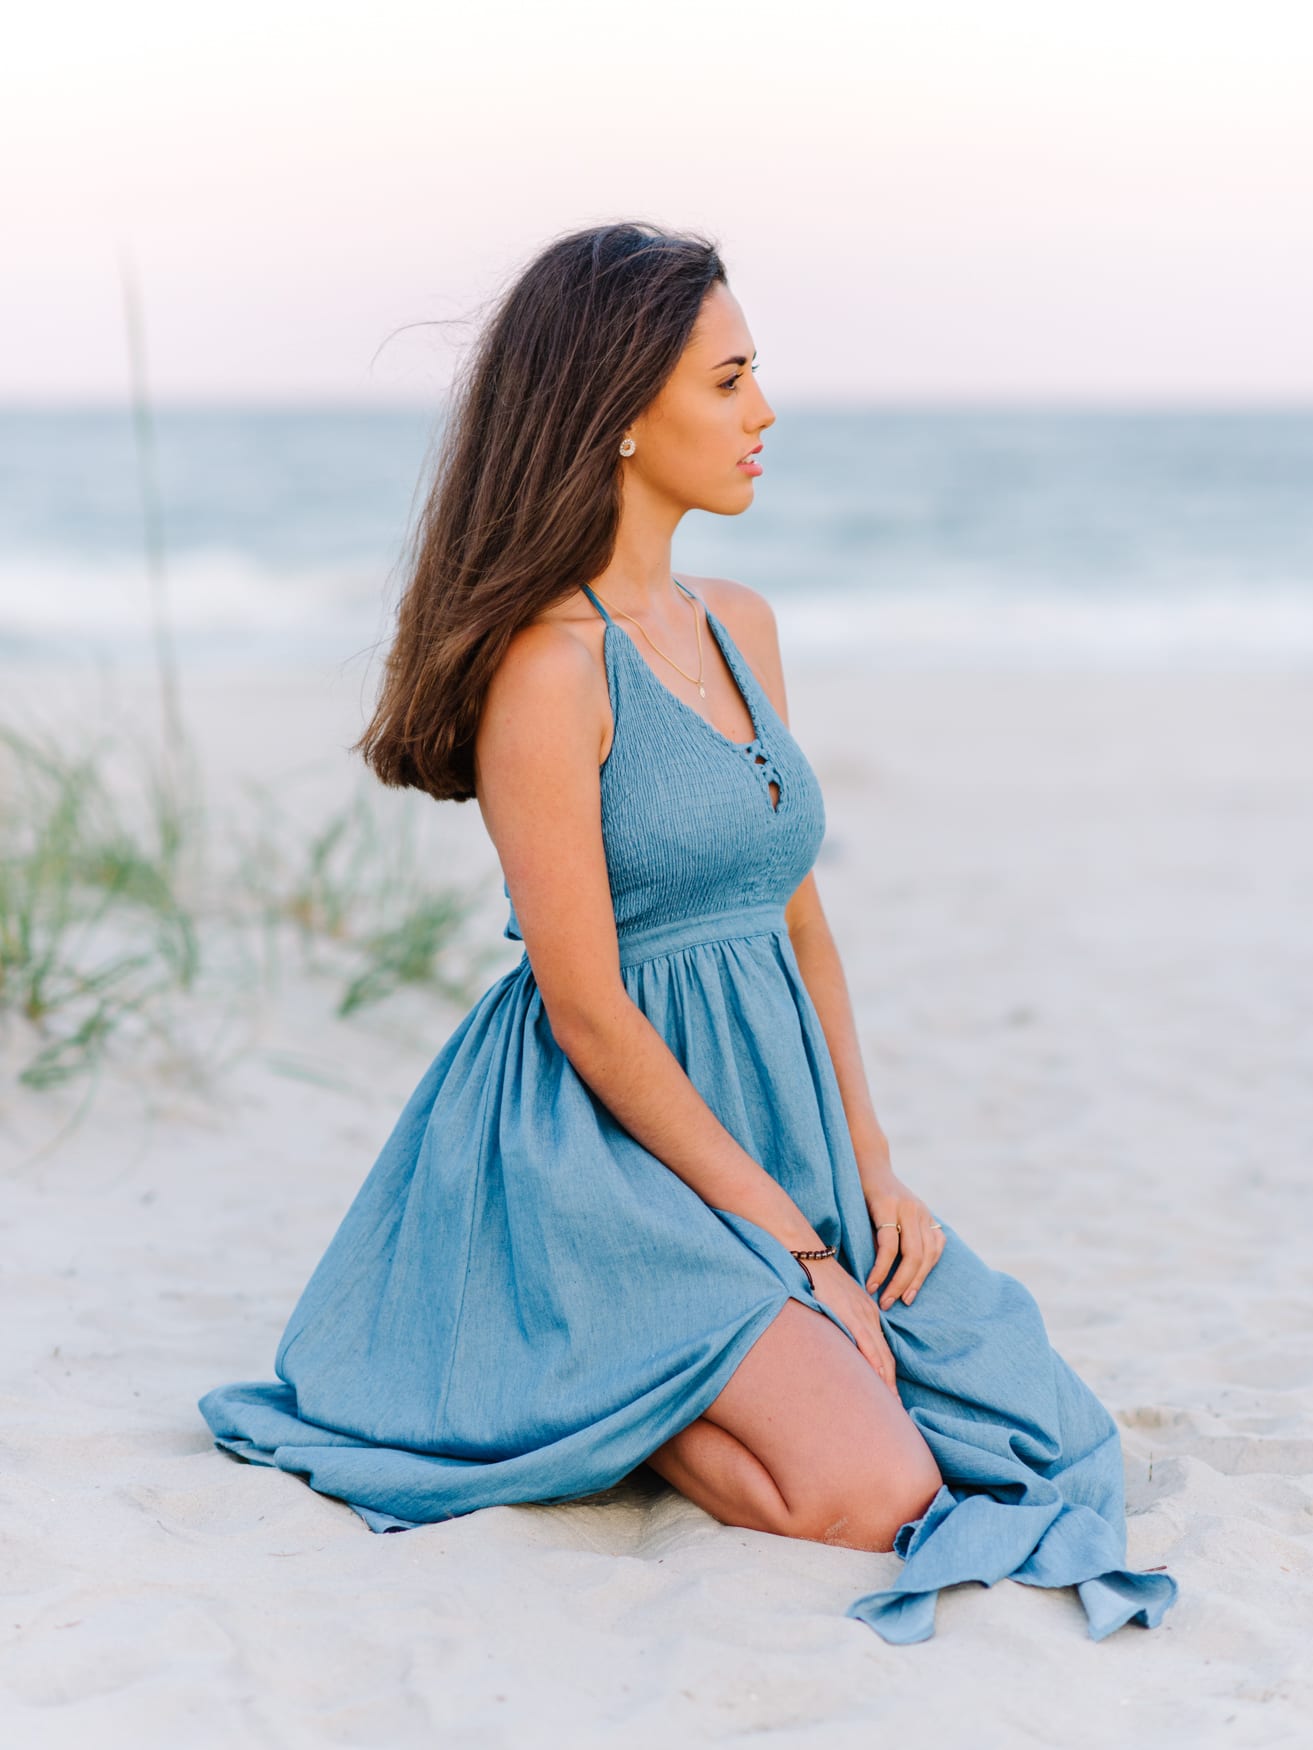 Sitting Pose for Senior Girl on the Beach in Charleston, SC by Pasha Belman Photography